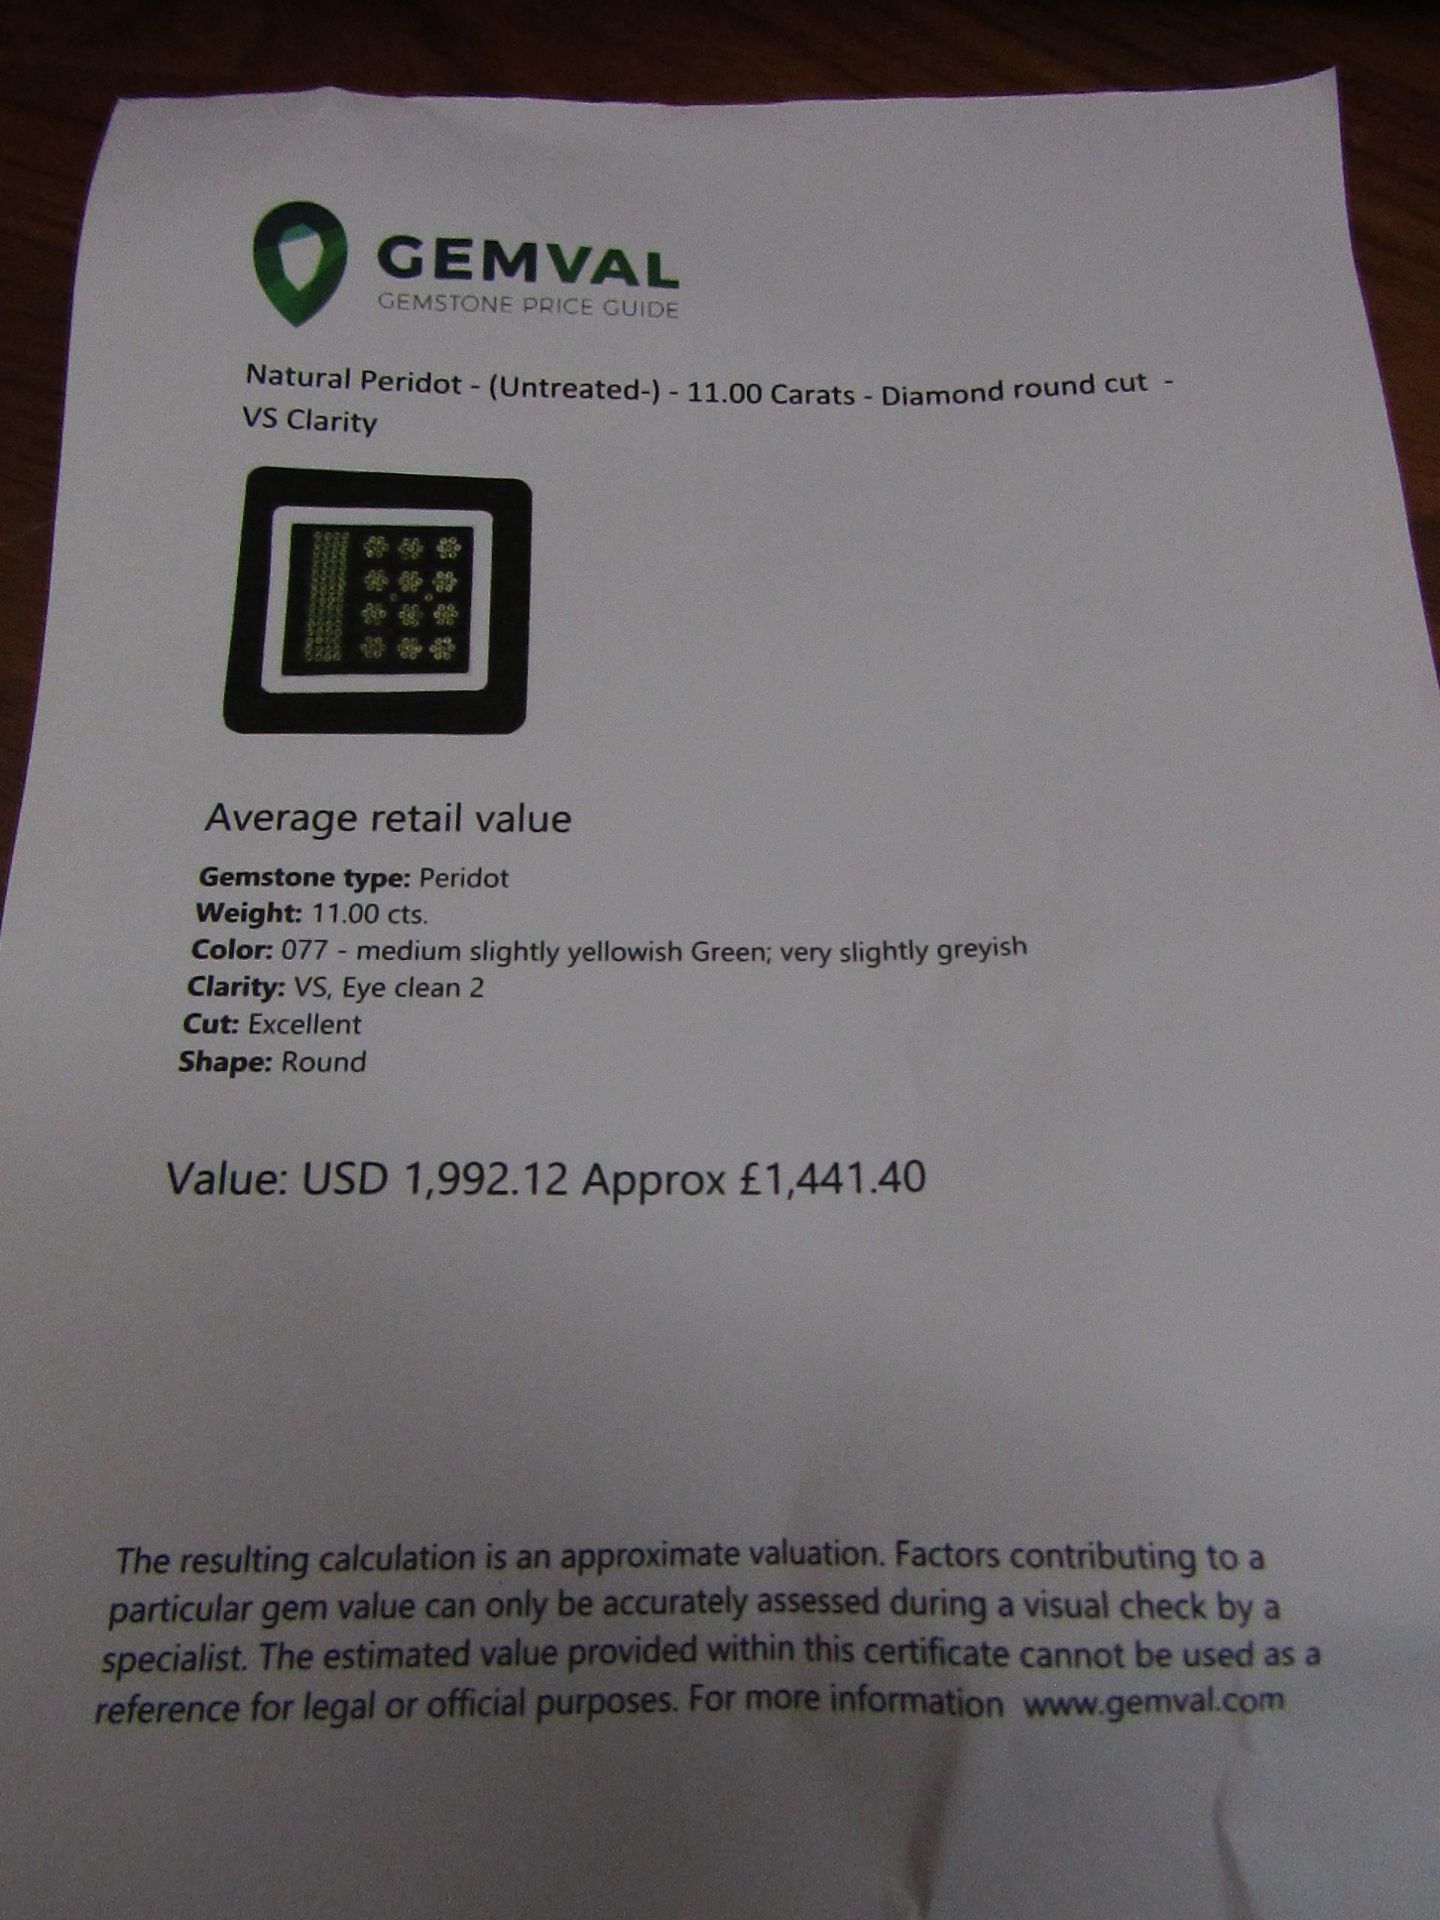 IGL&I Certified - Natural Peridot - 11.00 Carats - 150 Pieces - Average retail value £1,441.40. - Image 3 of 3